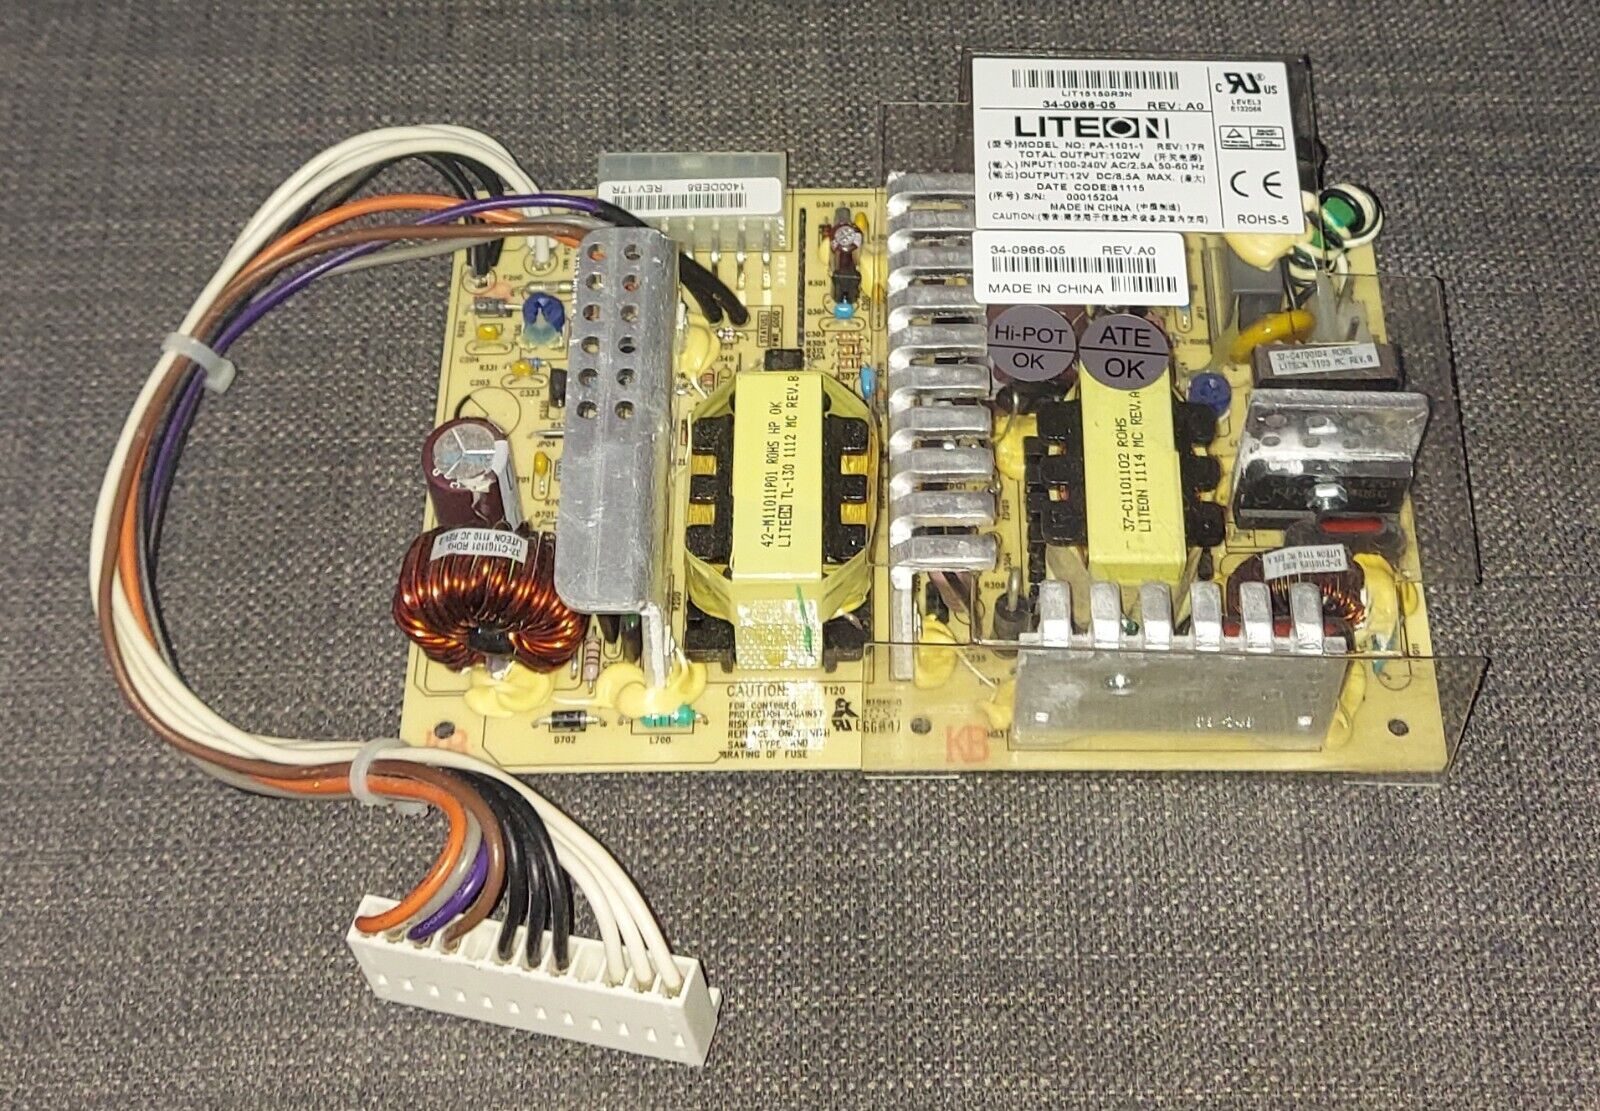 LITE-ON POWER SUPPLY PA-1101-1 34-0966-05 FOR CISCO VG224 VOICE GATEWAY